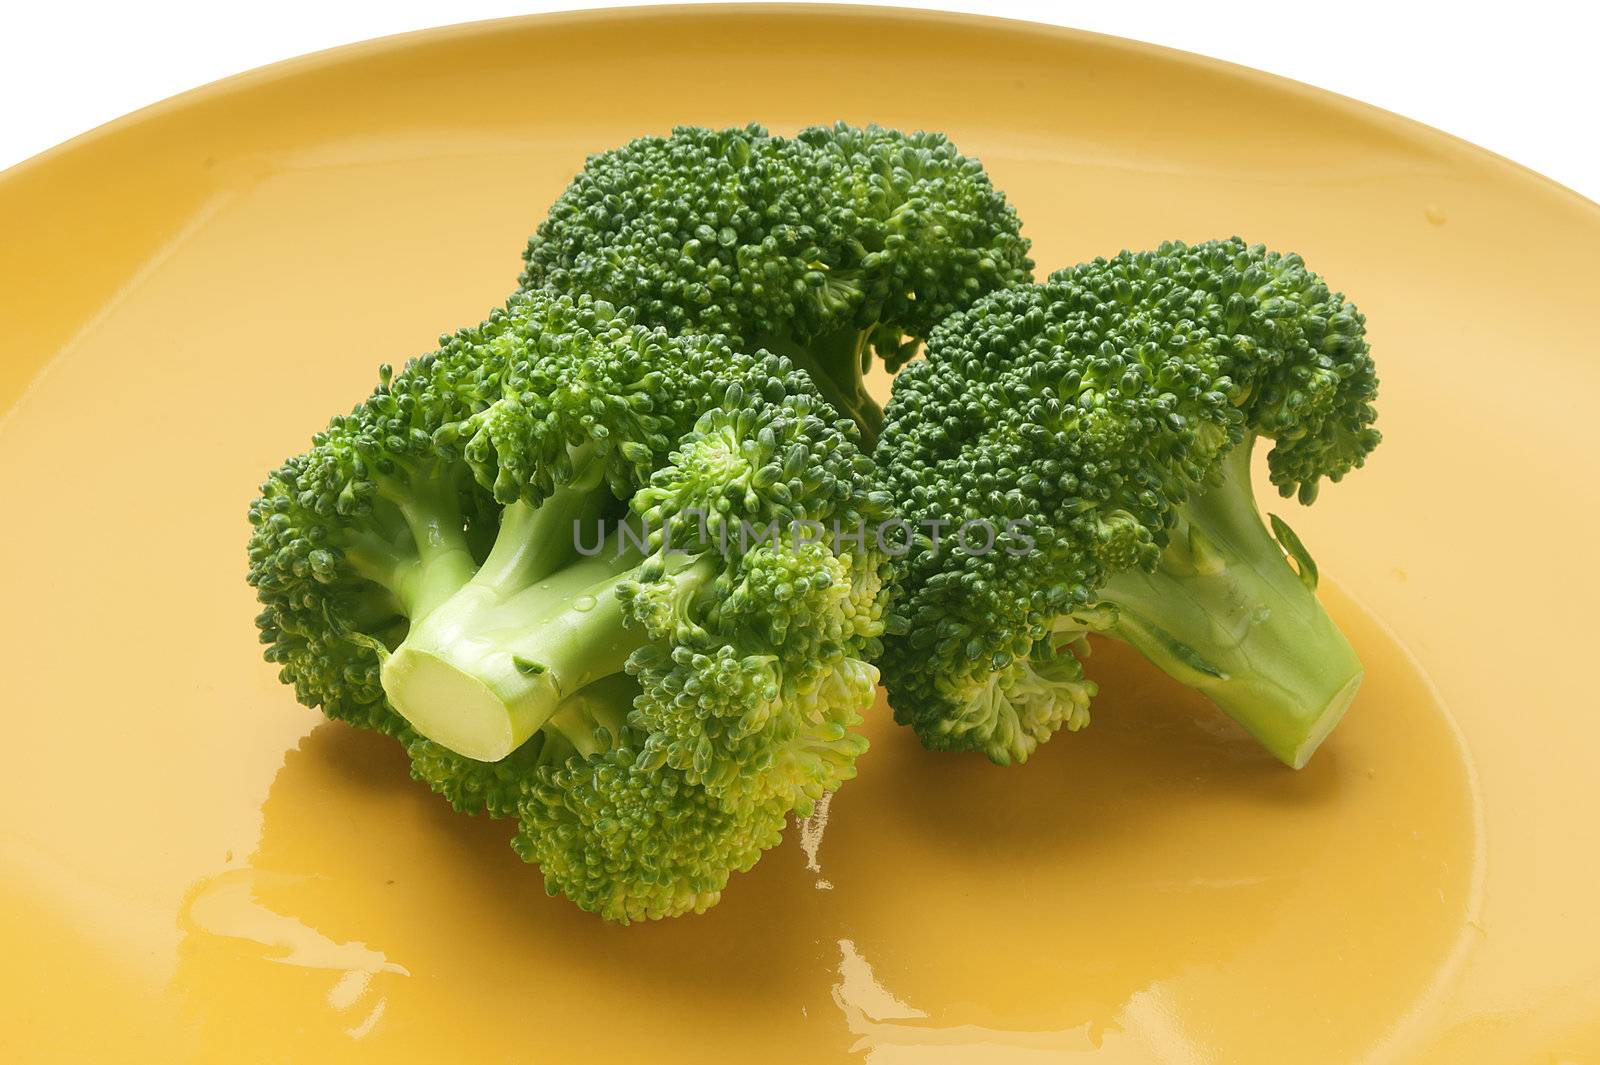 Some pieces of fresh green broccoli on the yellow plate